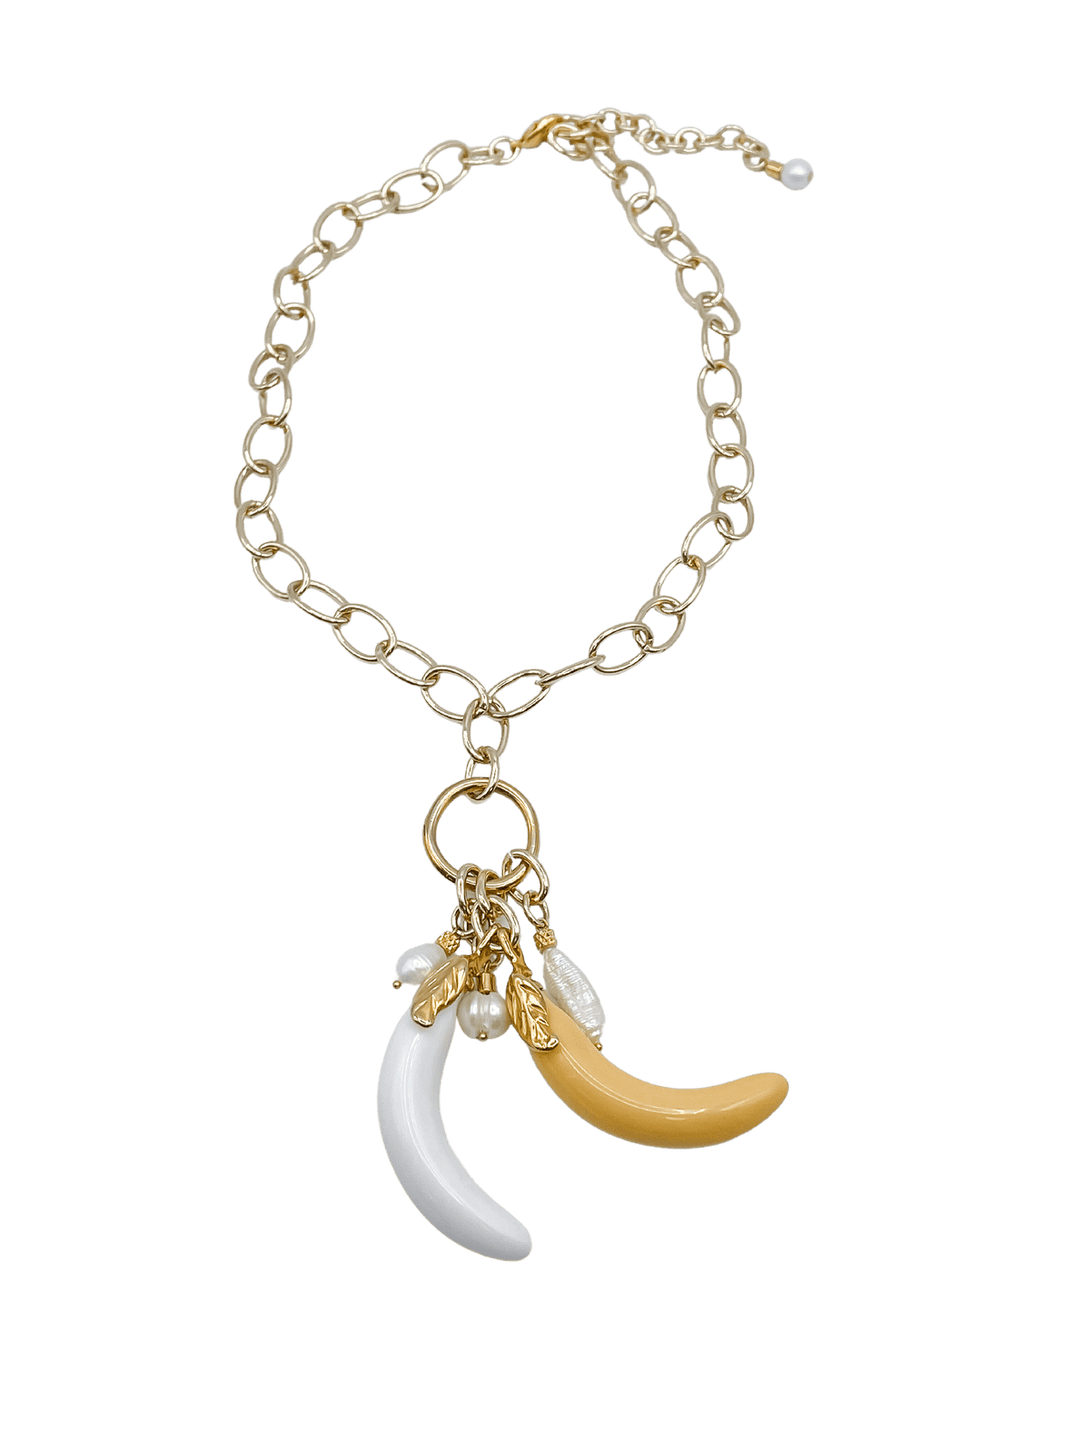 Goldtone Necklace with Ring Holding Freshwater Pearls and Bananas